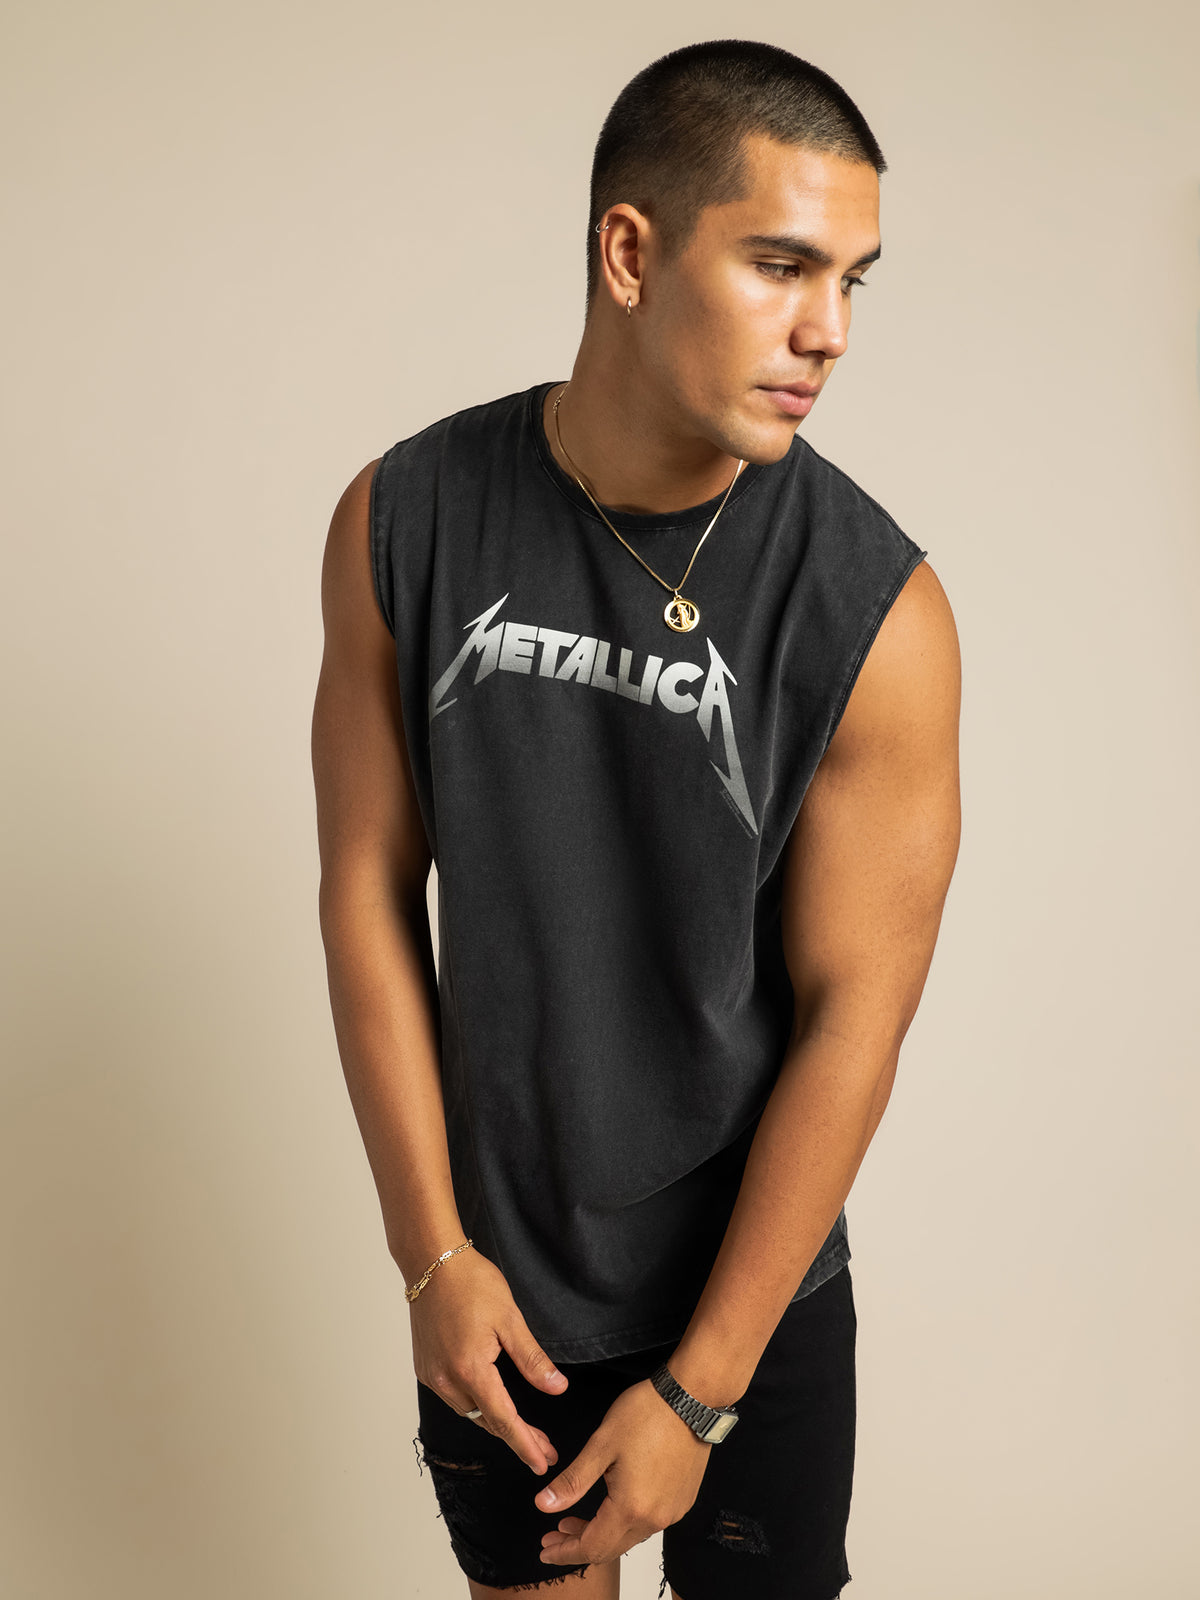 Metallica Muscle T-Shirt in Washed Black